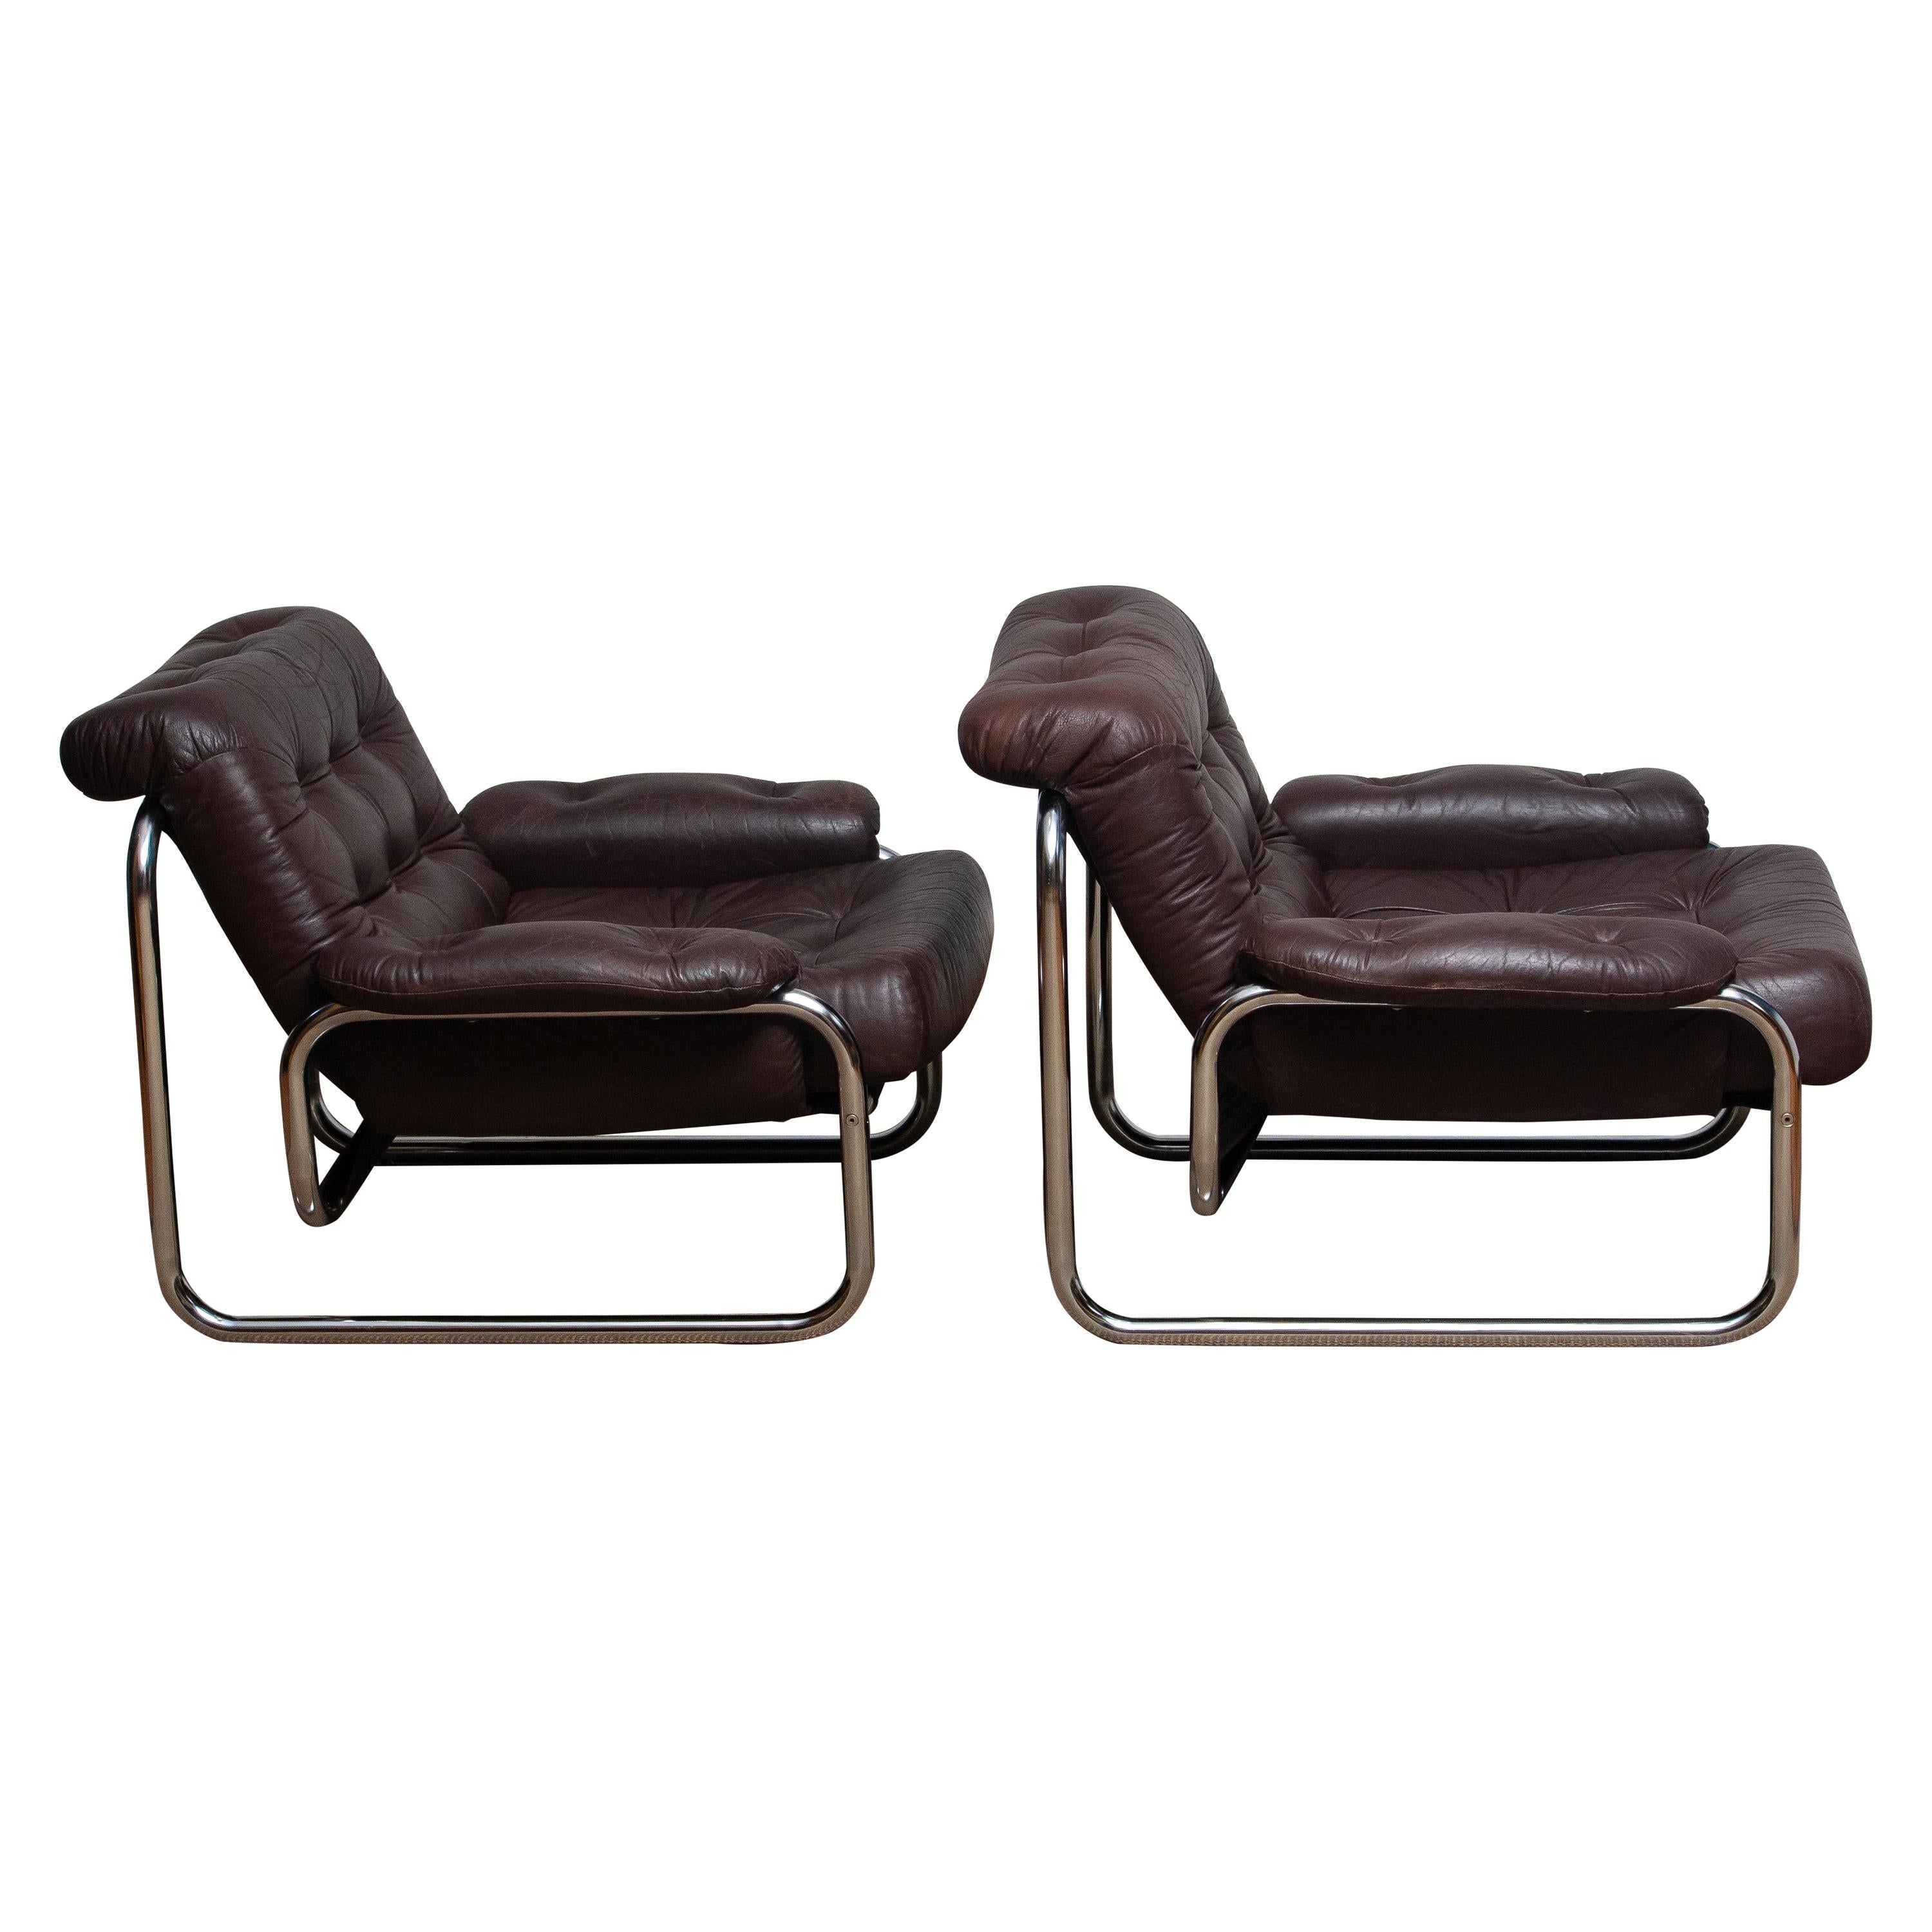 Pair of lounge / easy chairs model 'Troligen' designed by Johan Bertil Häggström for Sved Form, Sweden
These chairs are made of a tubular metal chromed frame with brown leather cushions and armrests.
They are in a wonderful condition.
Produced in